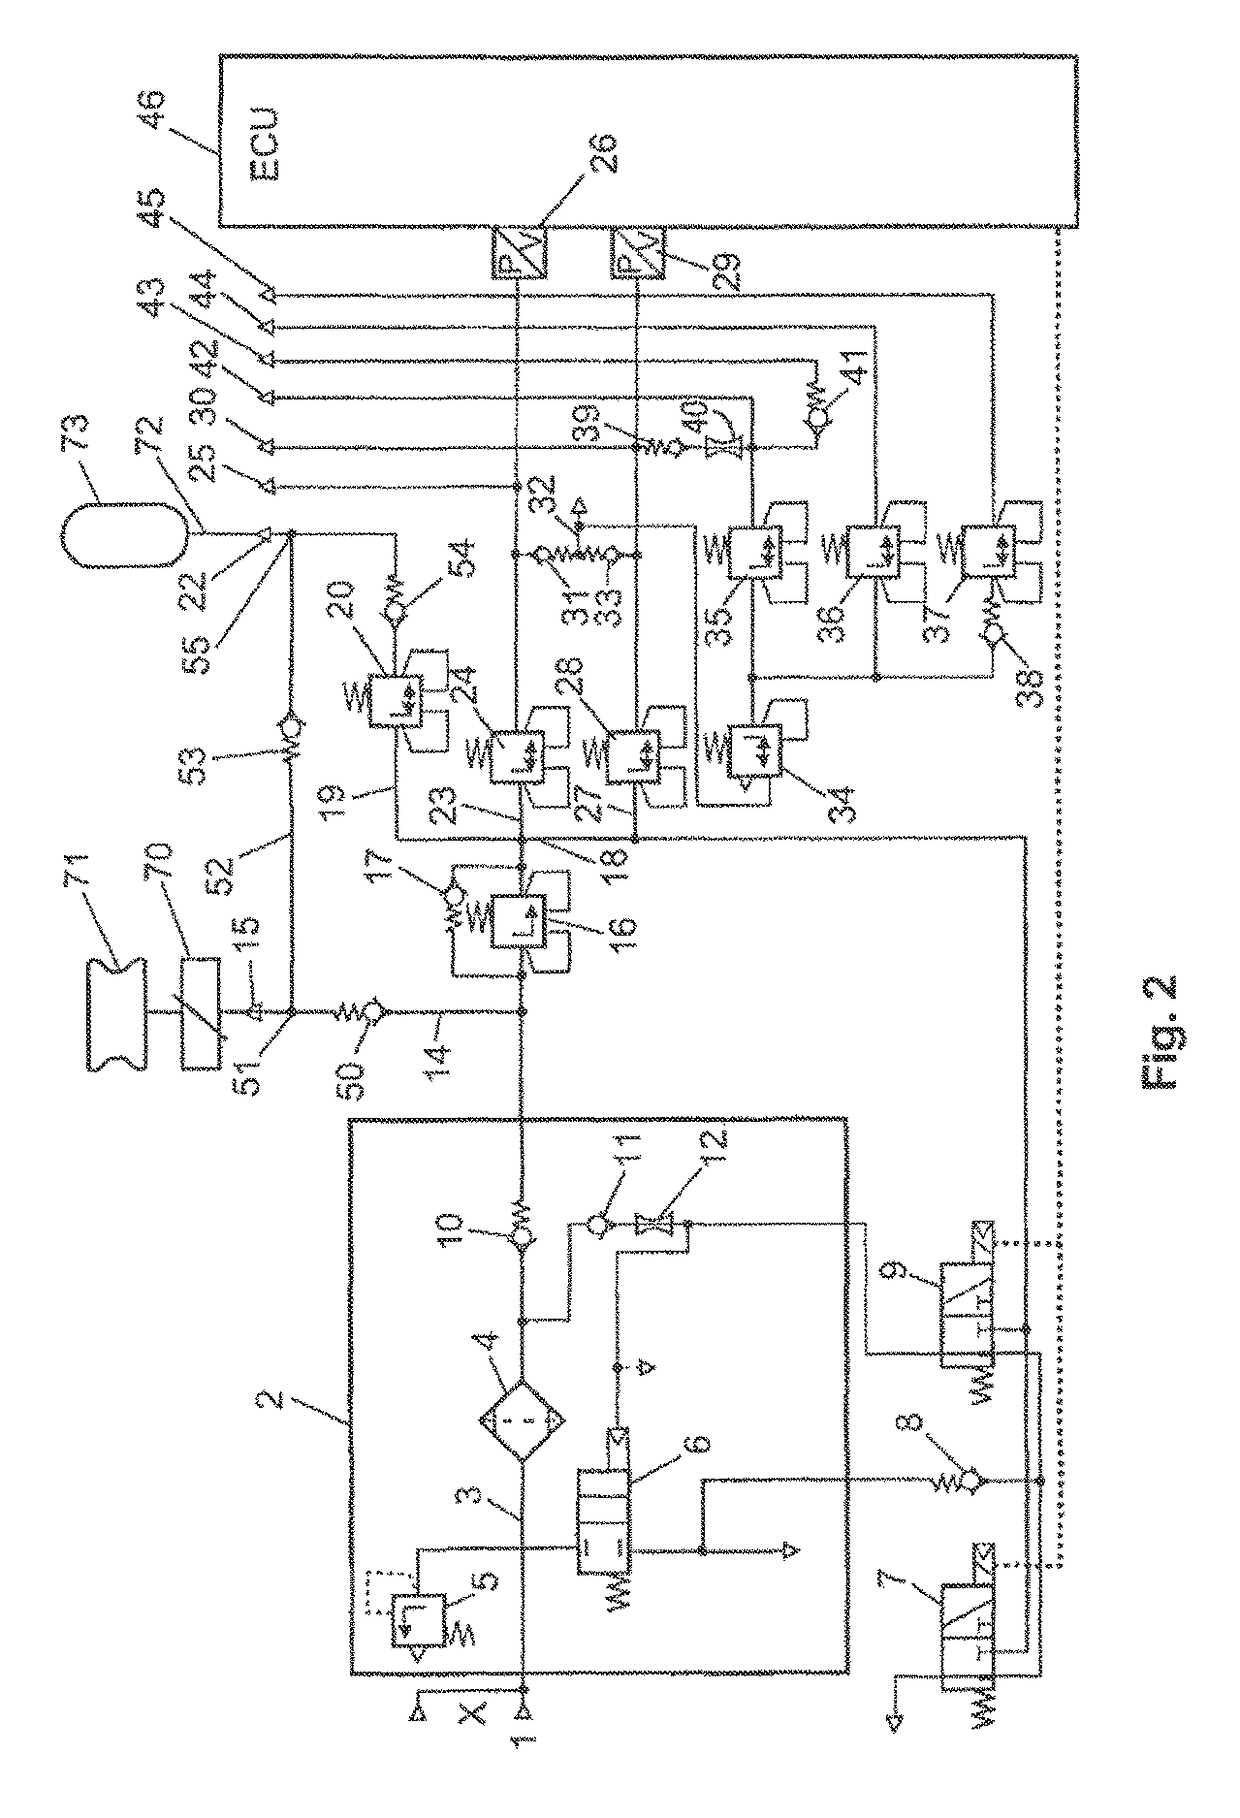 Compressed air supply system for a compressed air consumer circuit